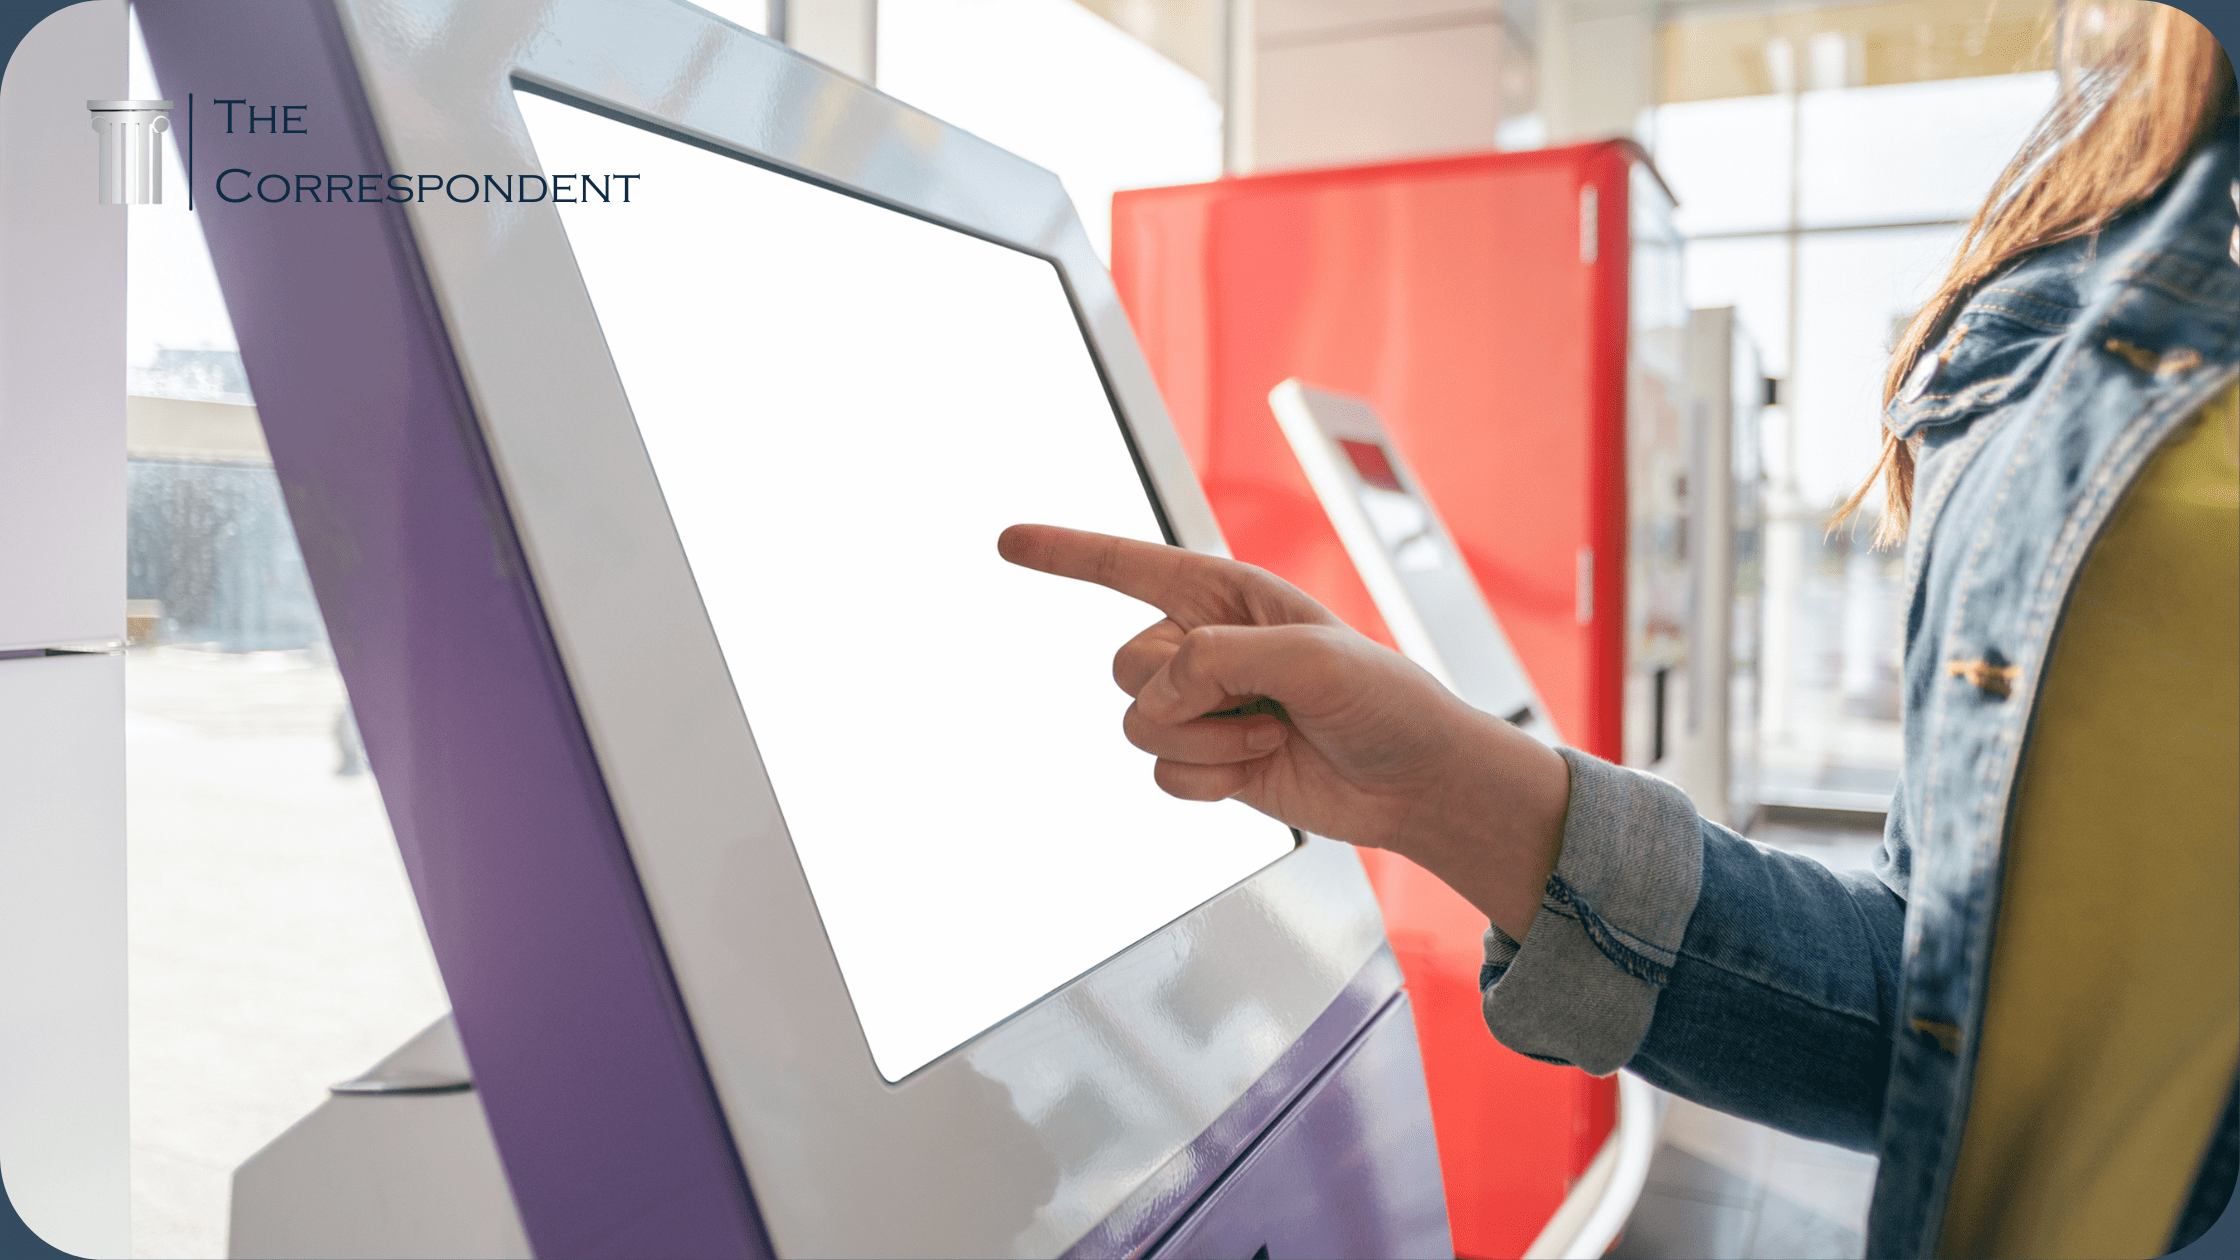 Interactive Teller Machines (ITMs): Pros and Cons for Your Community Bank